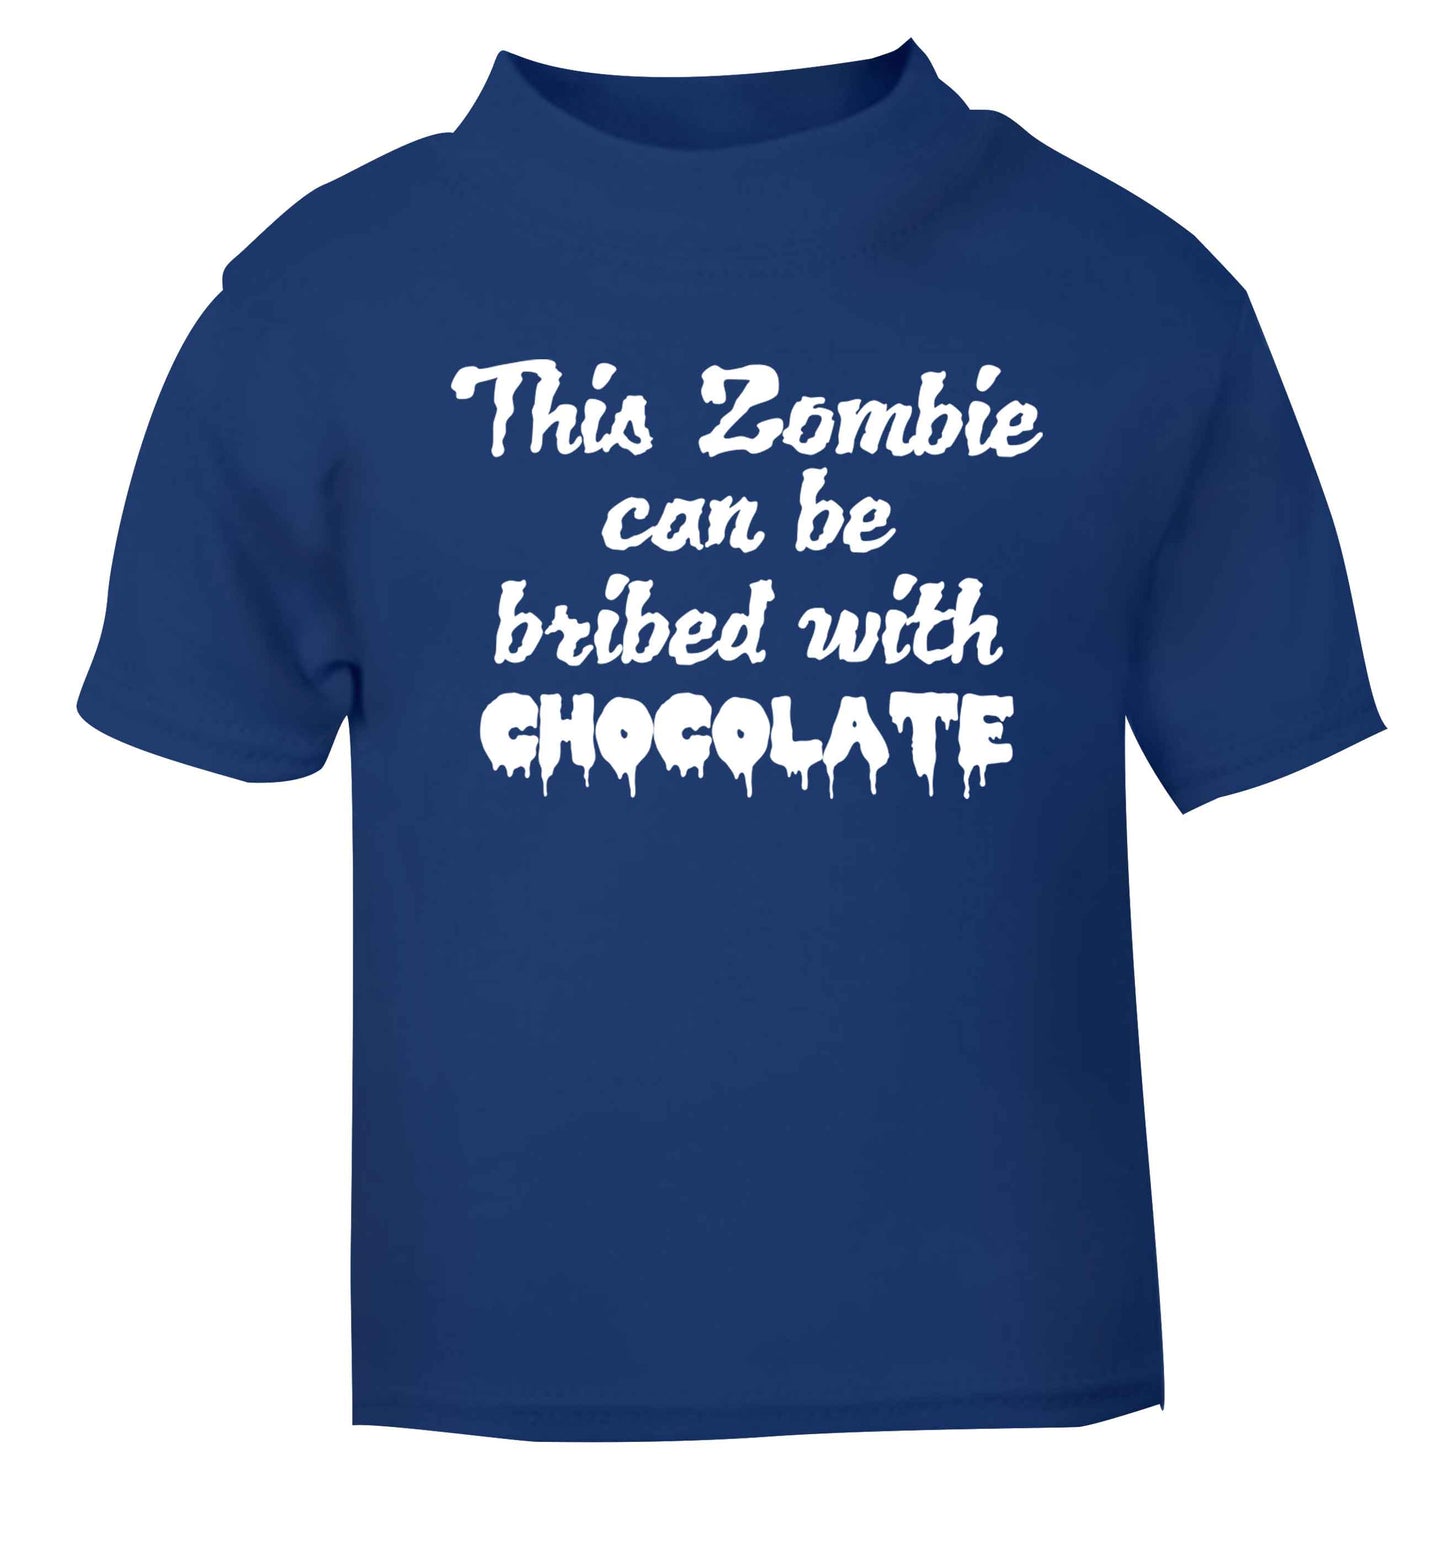 This zombie can be bribed with chocolate blue baby toddler Tshirt 2 Years